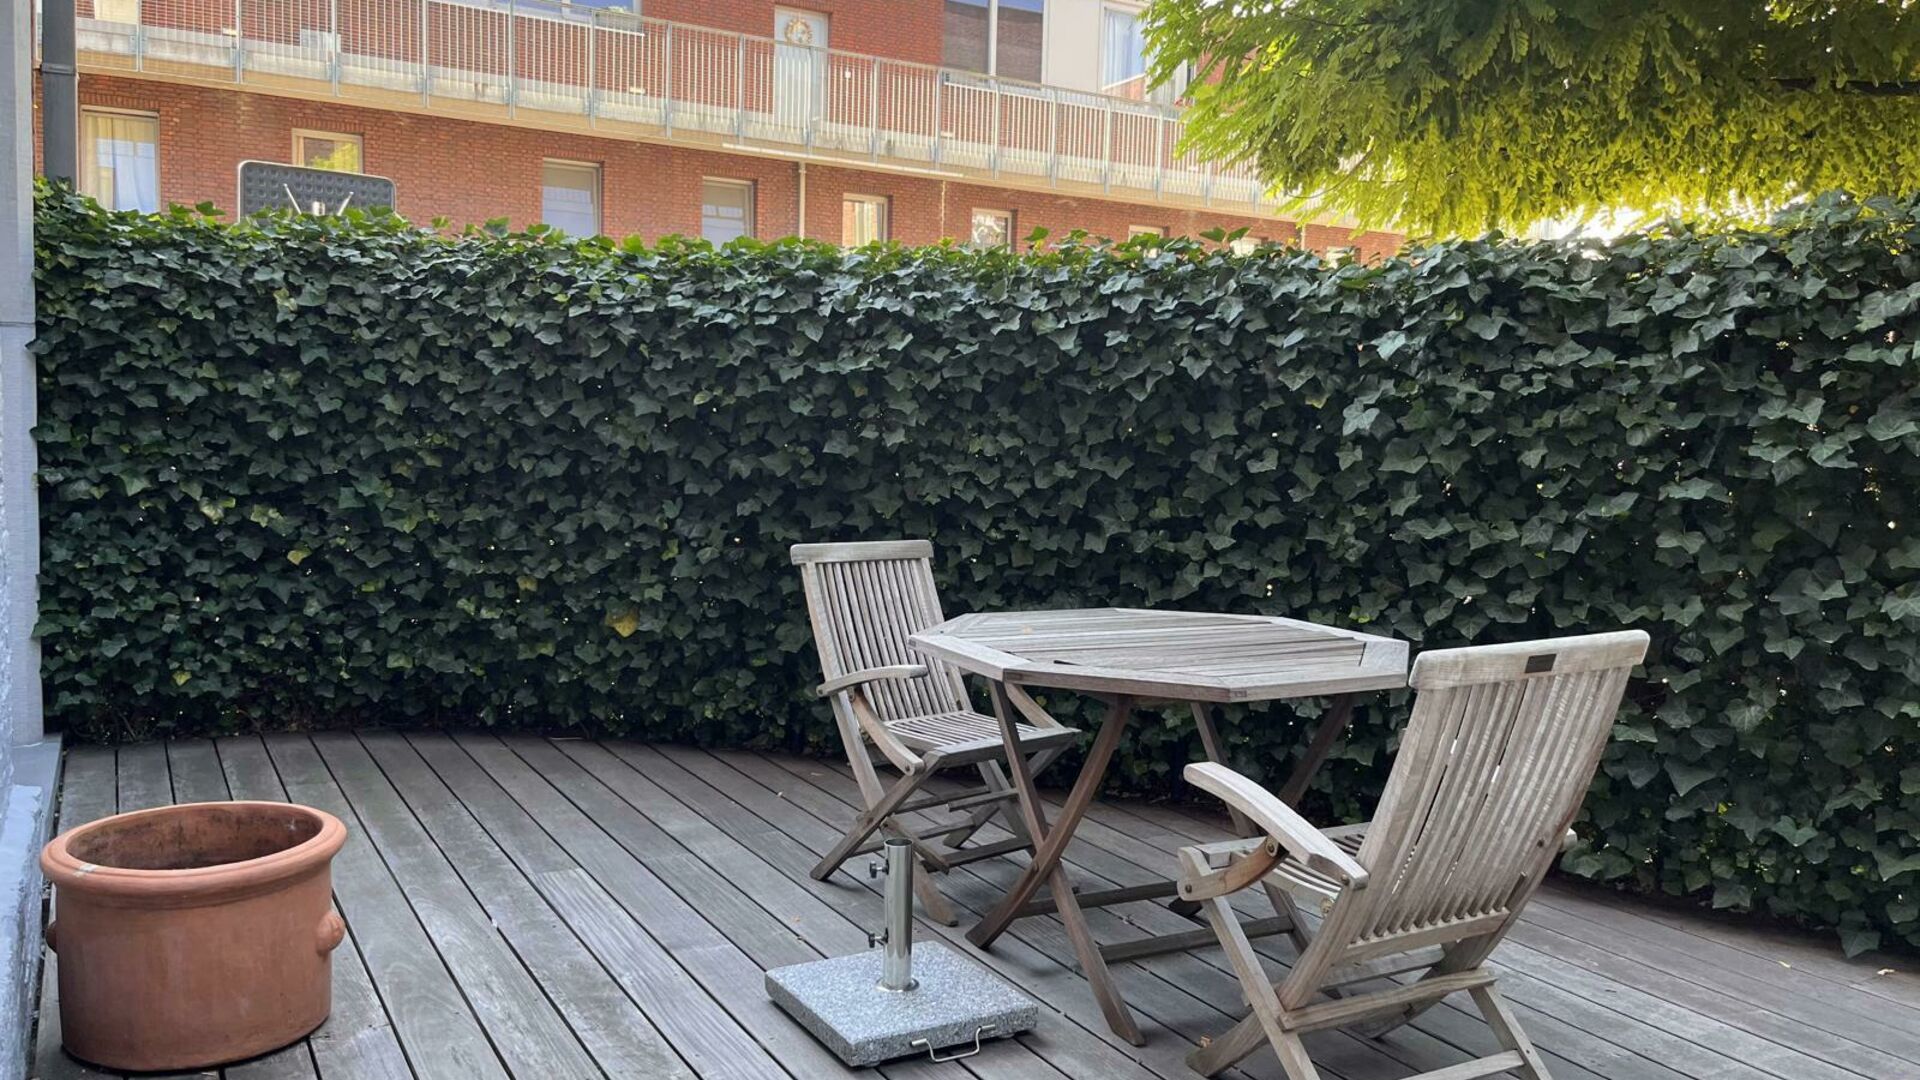 This handsome duplex apartment, located in the former gendarmerie barracks, overlooks the green courtyard and has its private entrance and terrace of +- 25 m² with separate storage room. The apartment is fully furnished and has the following layout: entr